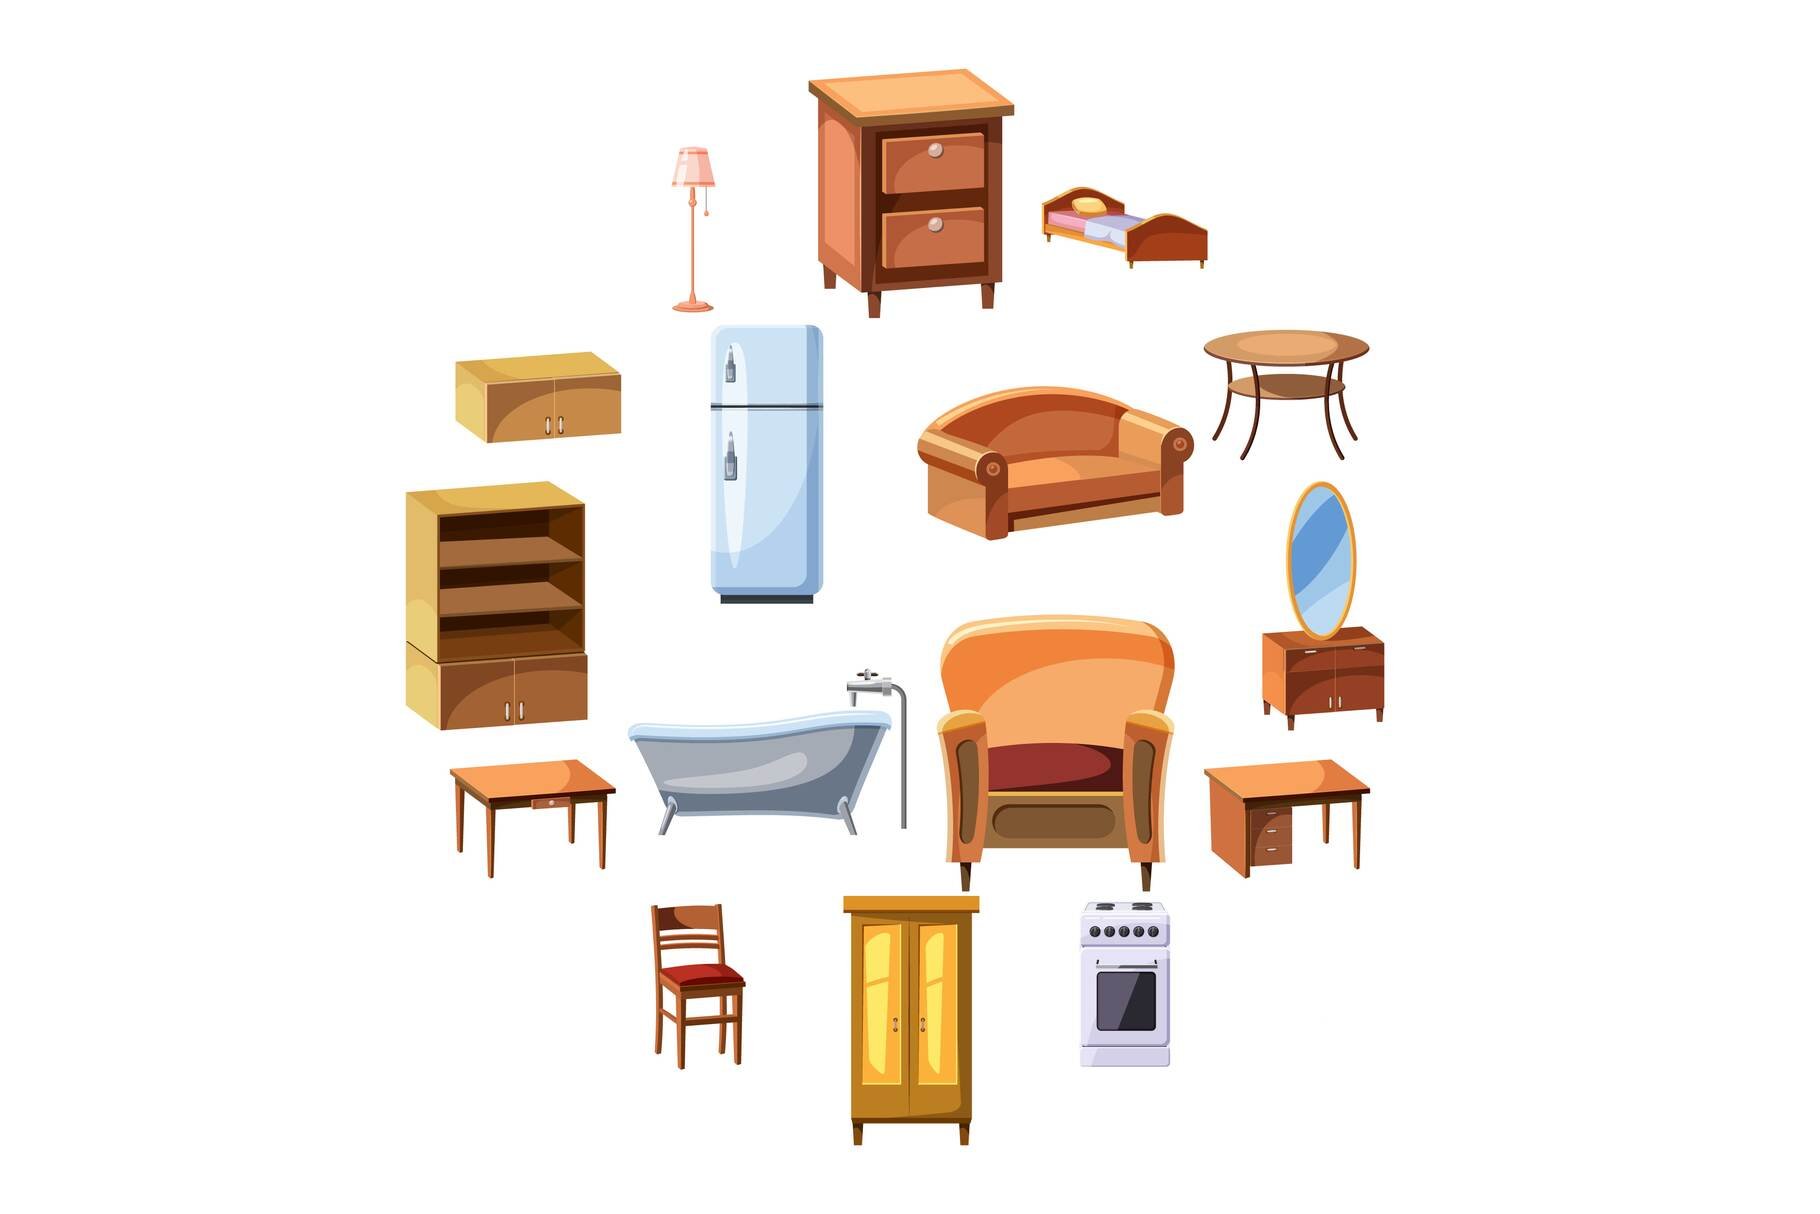 Furniture and household appliances cover image.